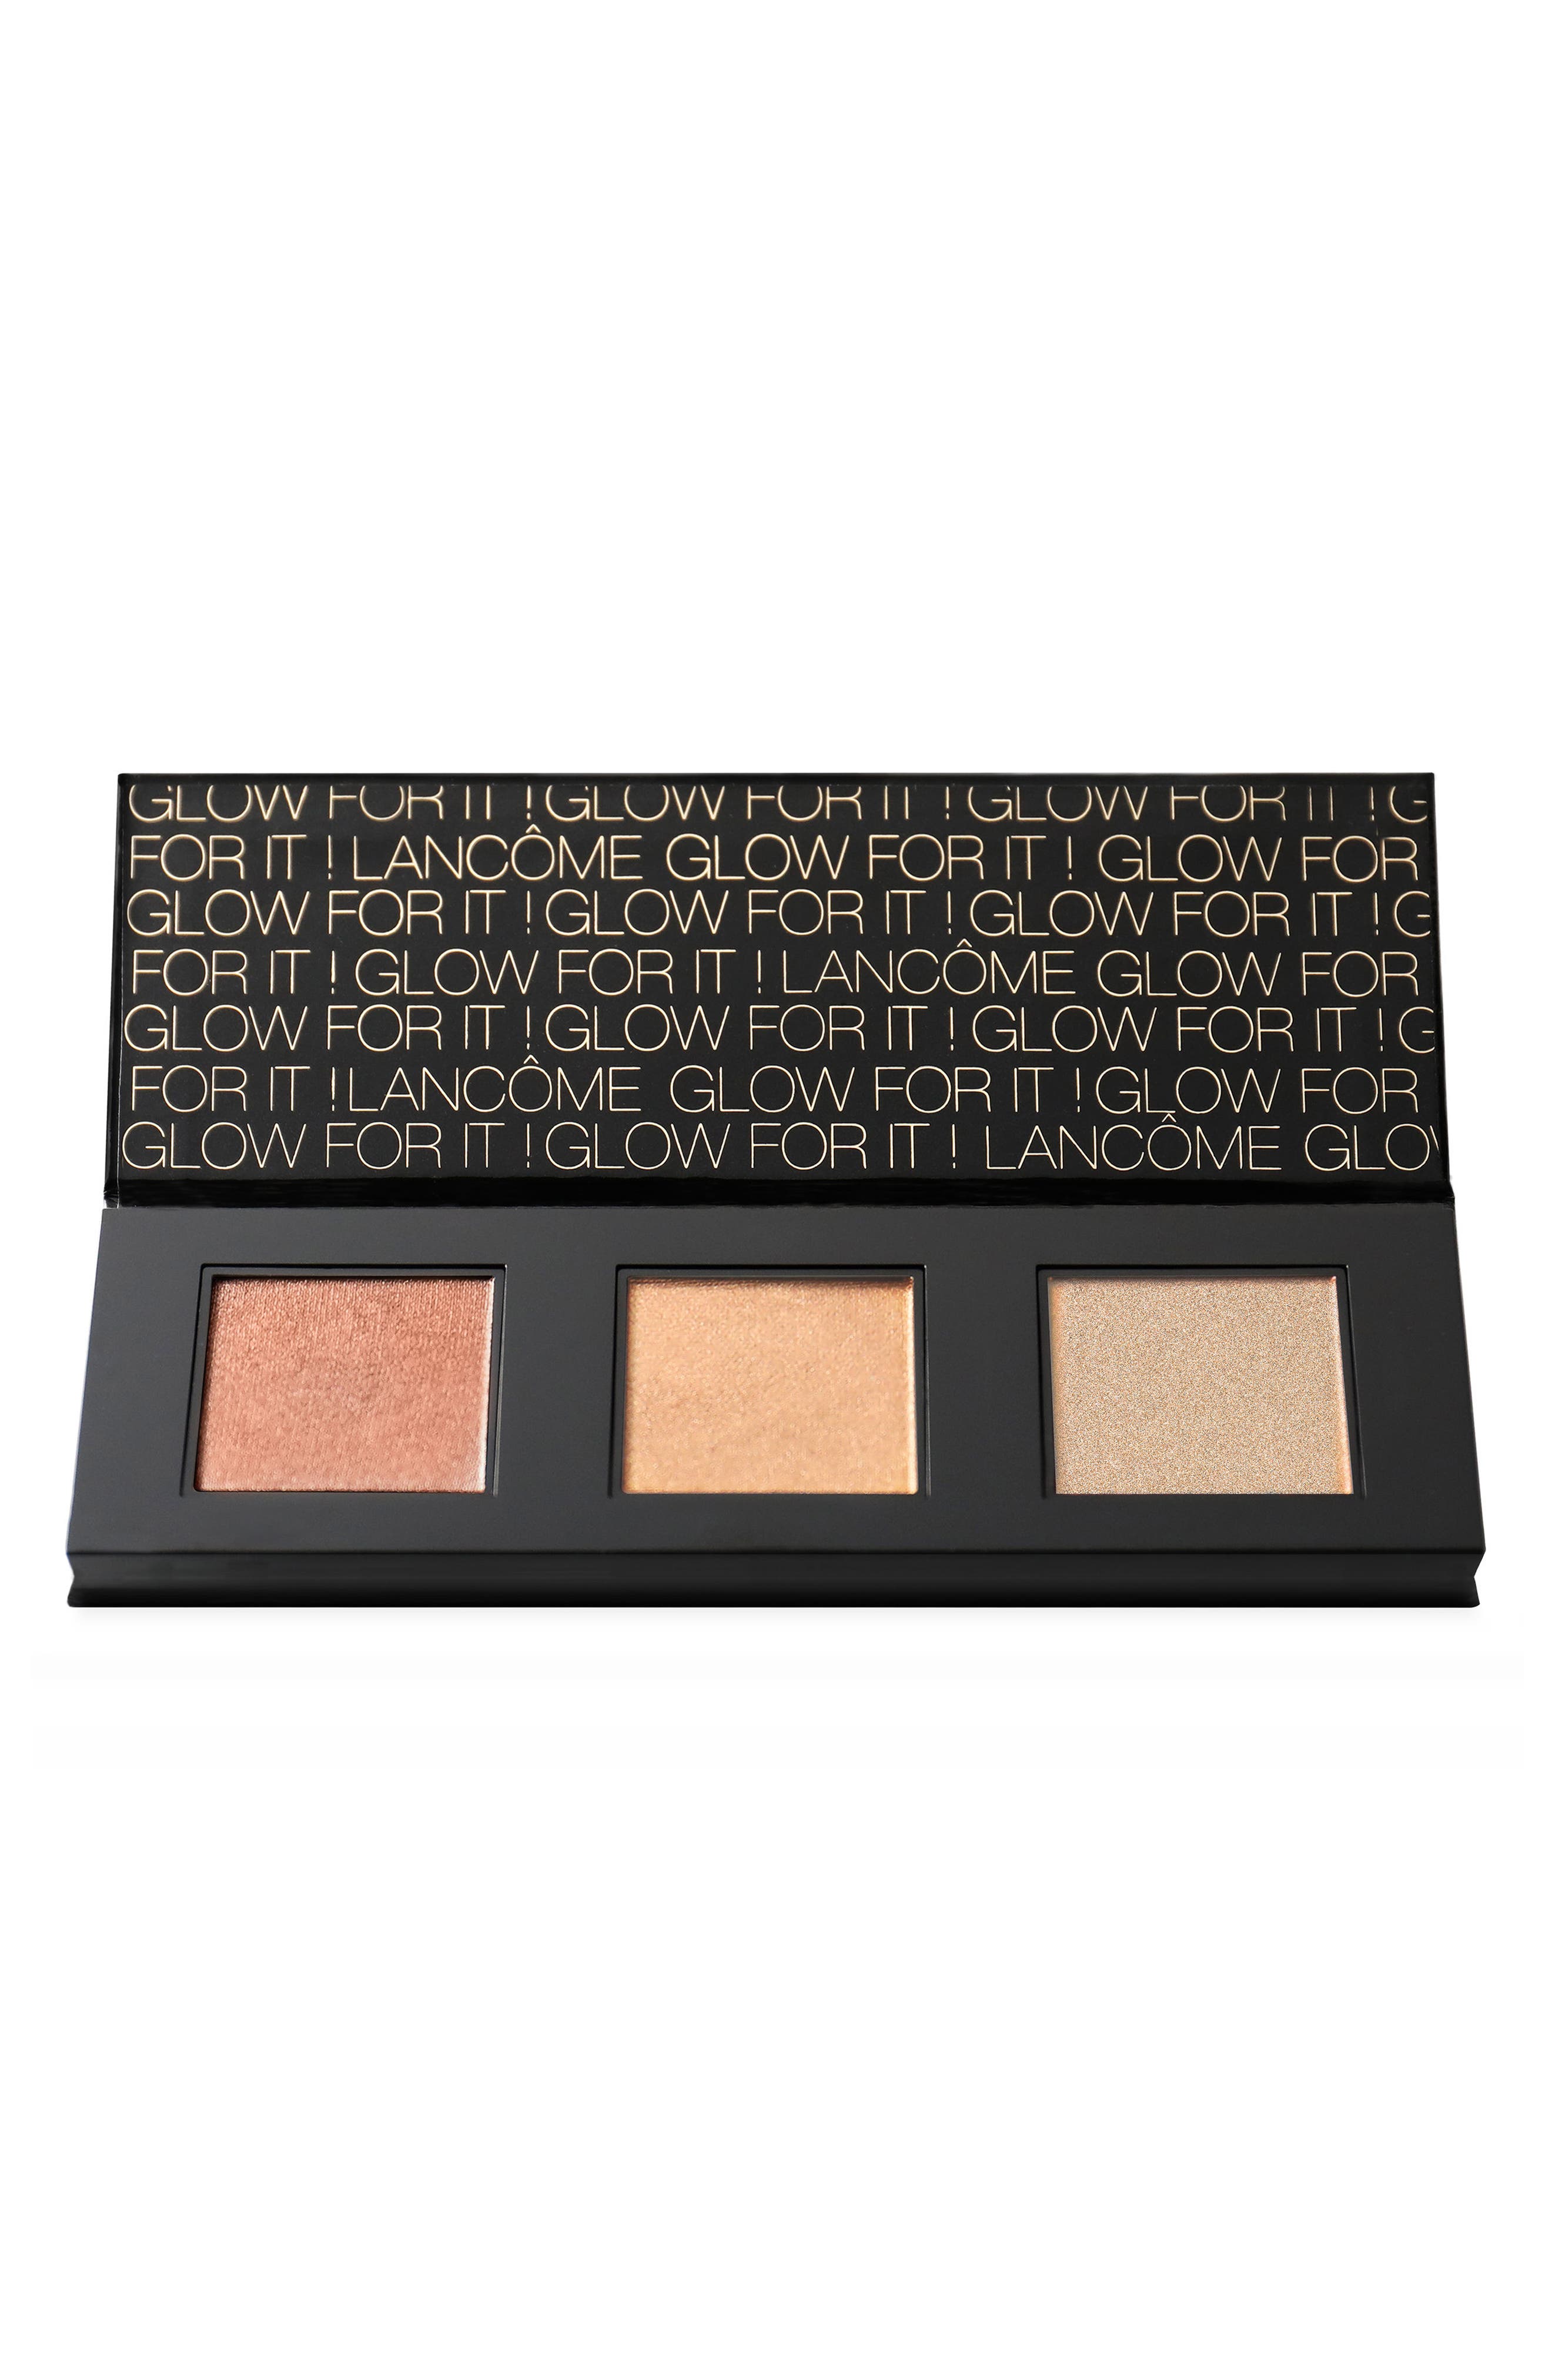 EAN 3605971605765 product image for Lancome Glow For It Allover Color Highlighting Palette - Golden Gleam | upcitemdb.com